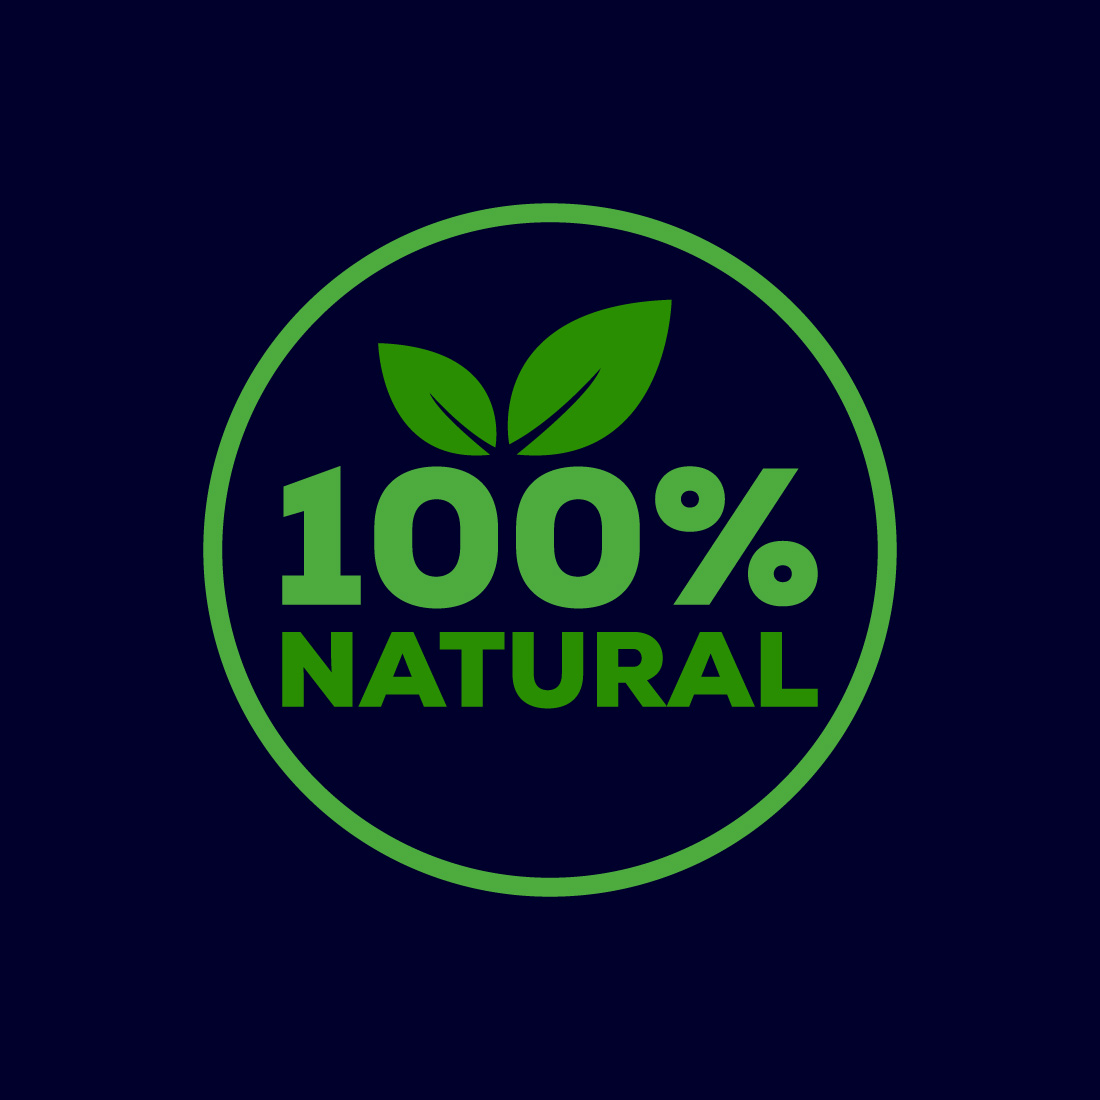 Natural, organic, fresh food vector logo or badge template for product preview image.